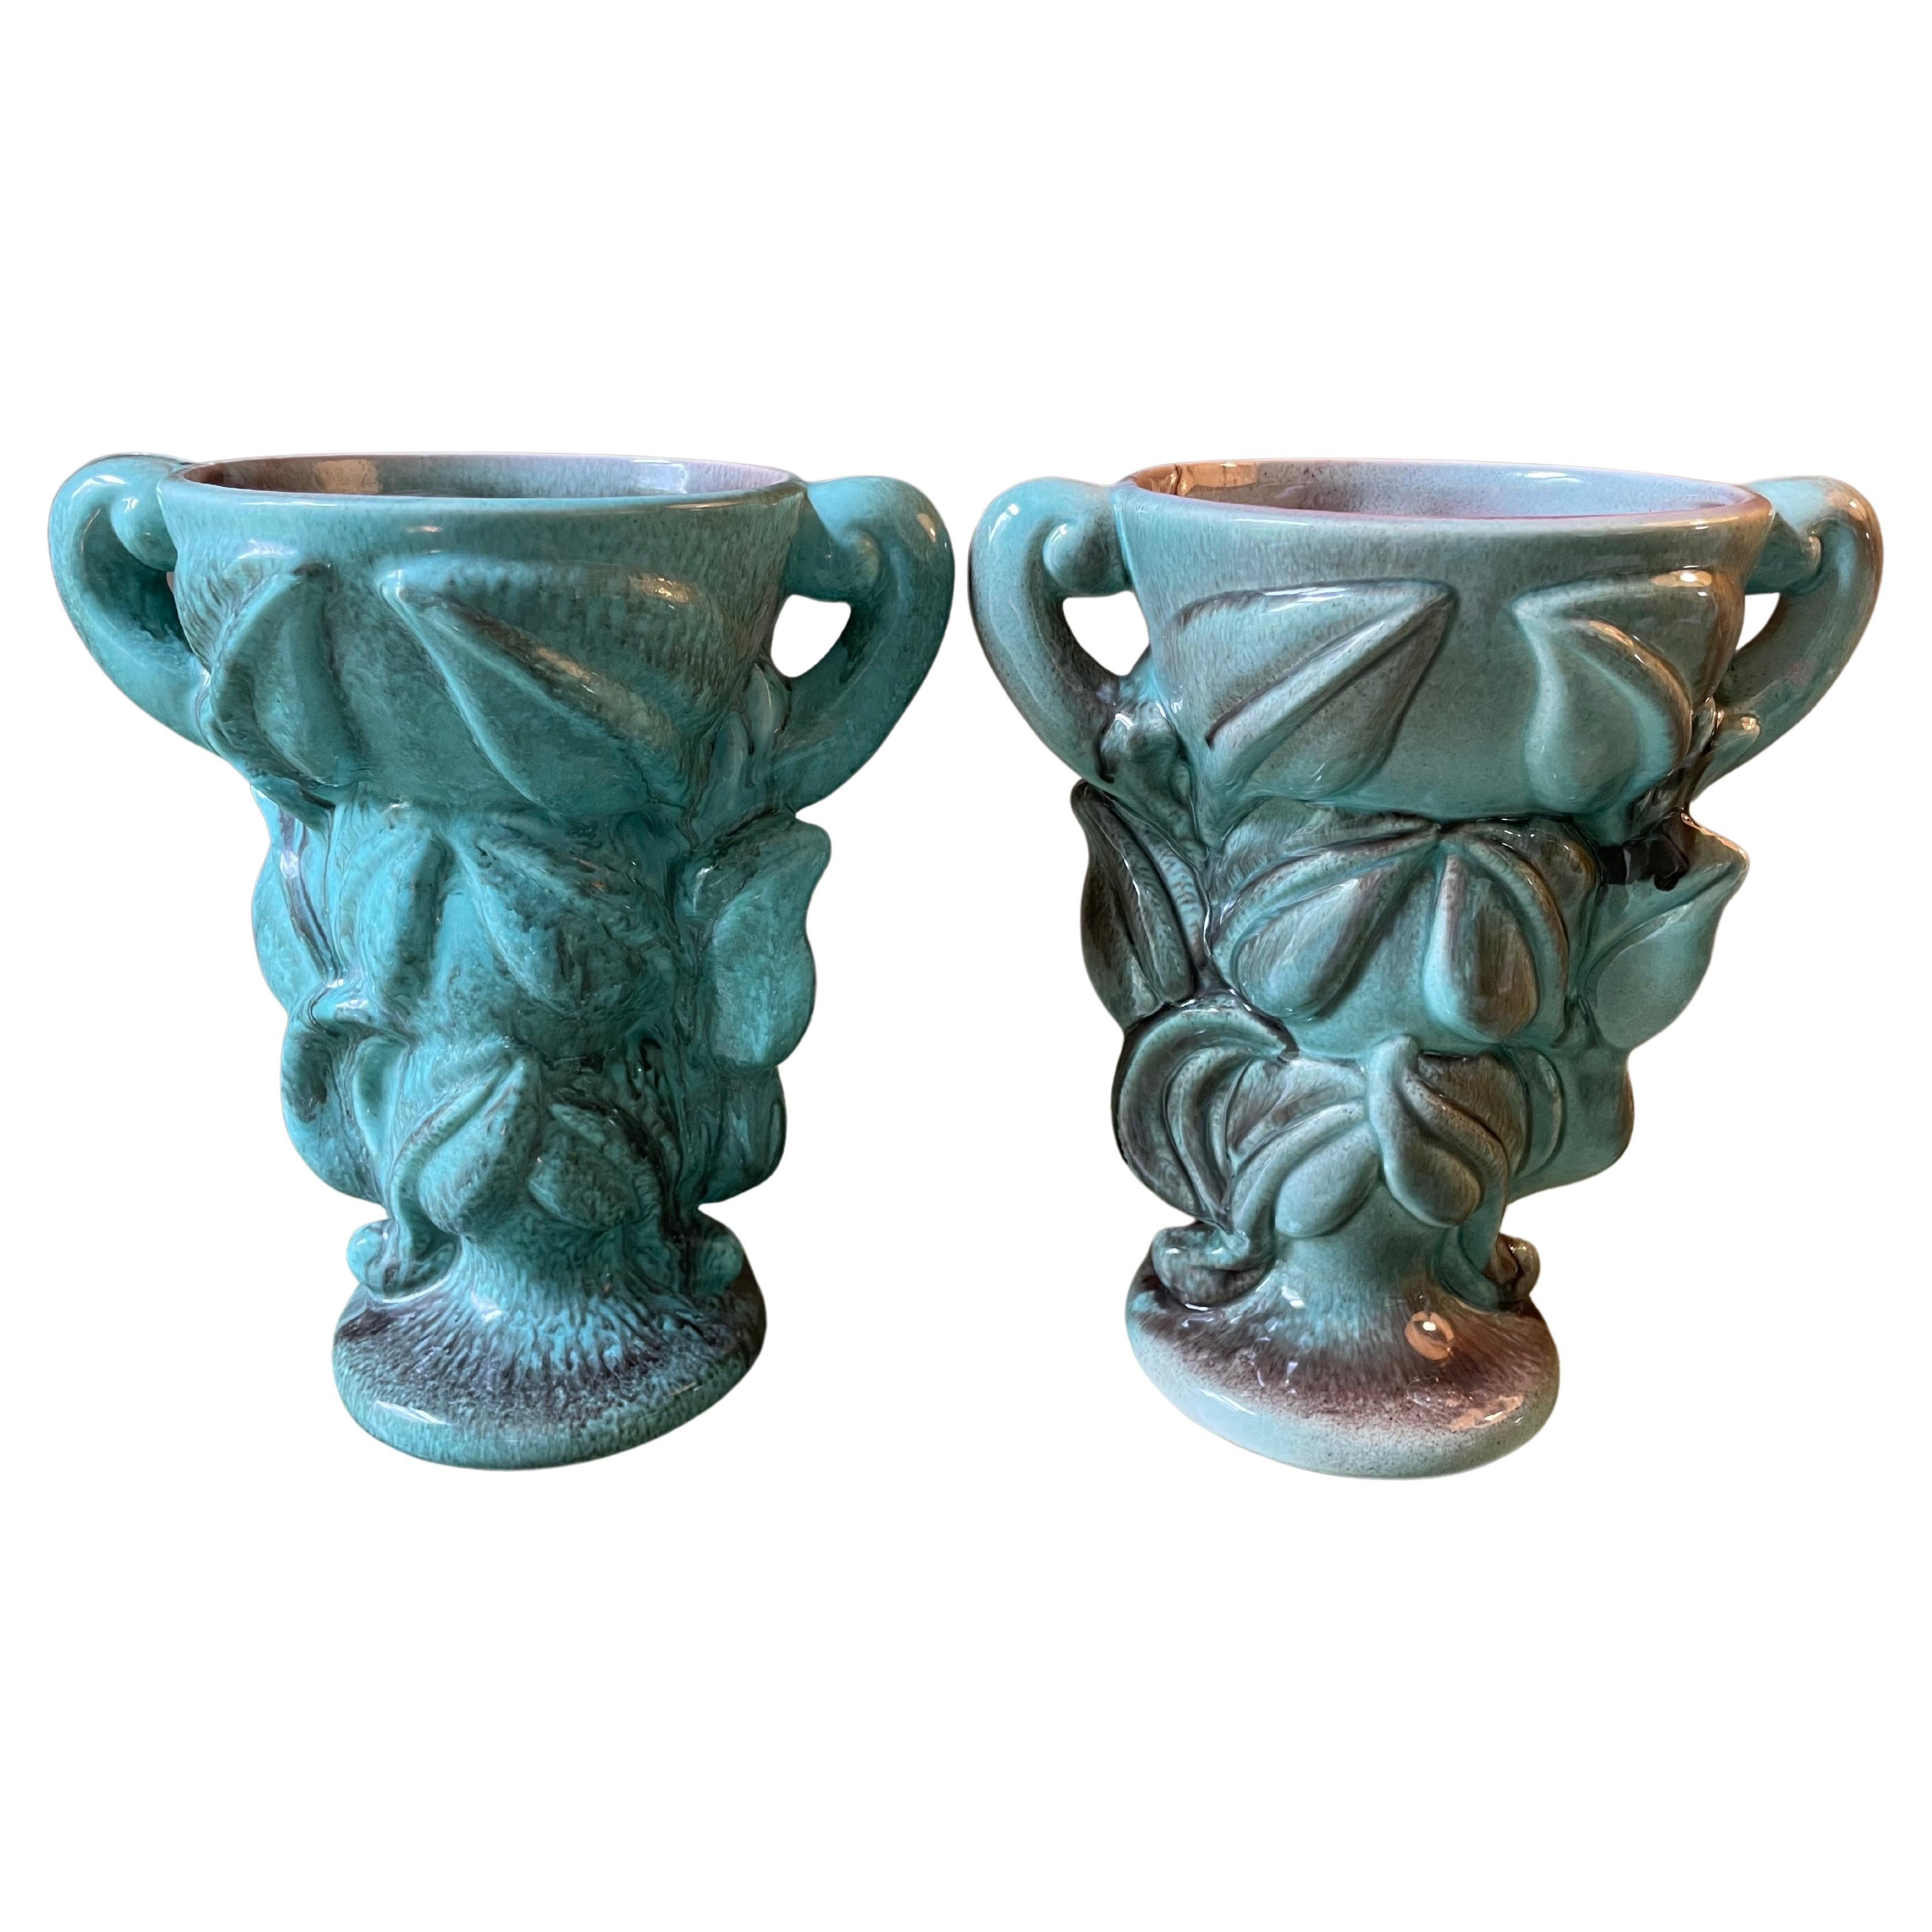 Pair of California Pottery Mid-Century Modern Vases by Gonder For Sale